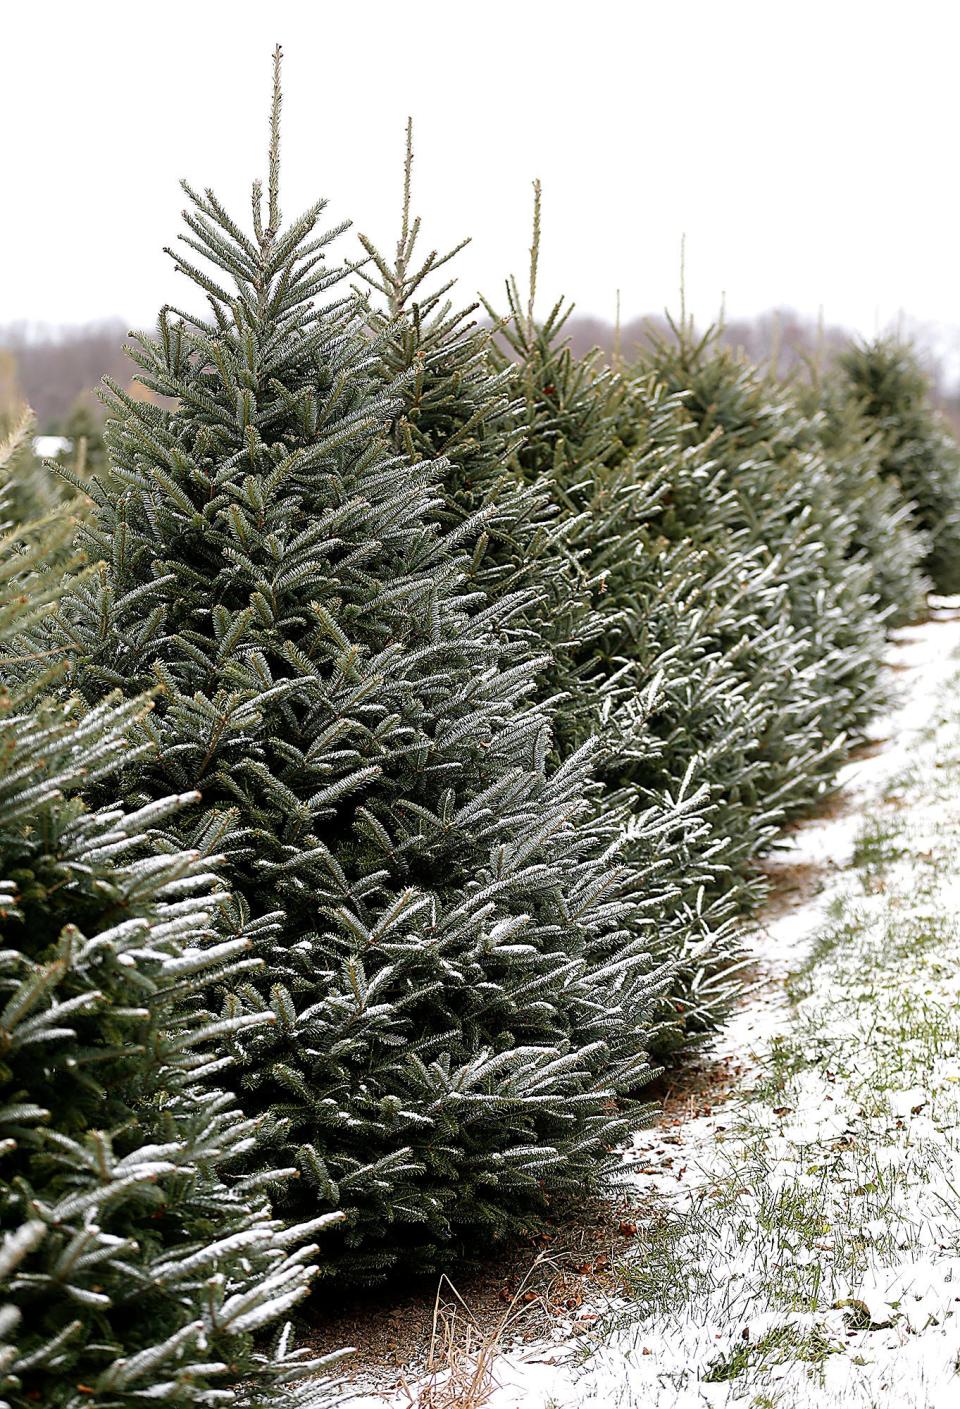 Once Thanksgiving weekend rolls around, Christmas tree farms in the Hudson Valley are open for business.